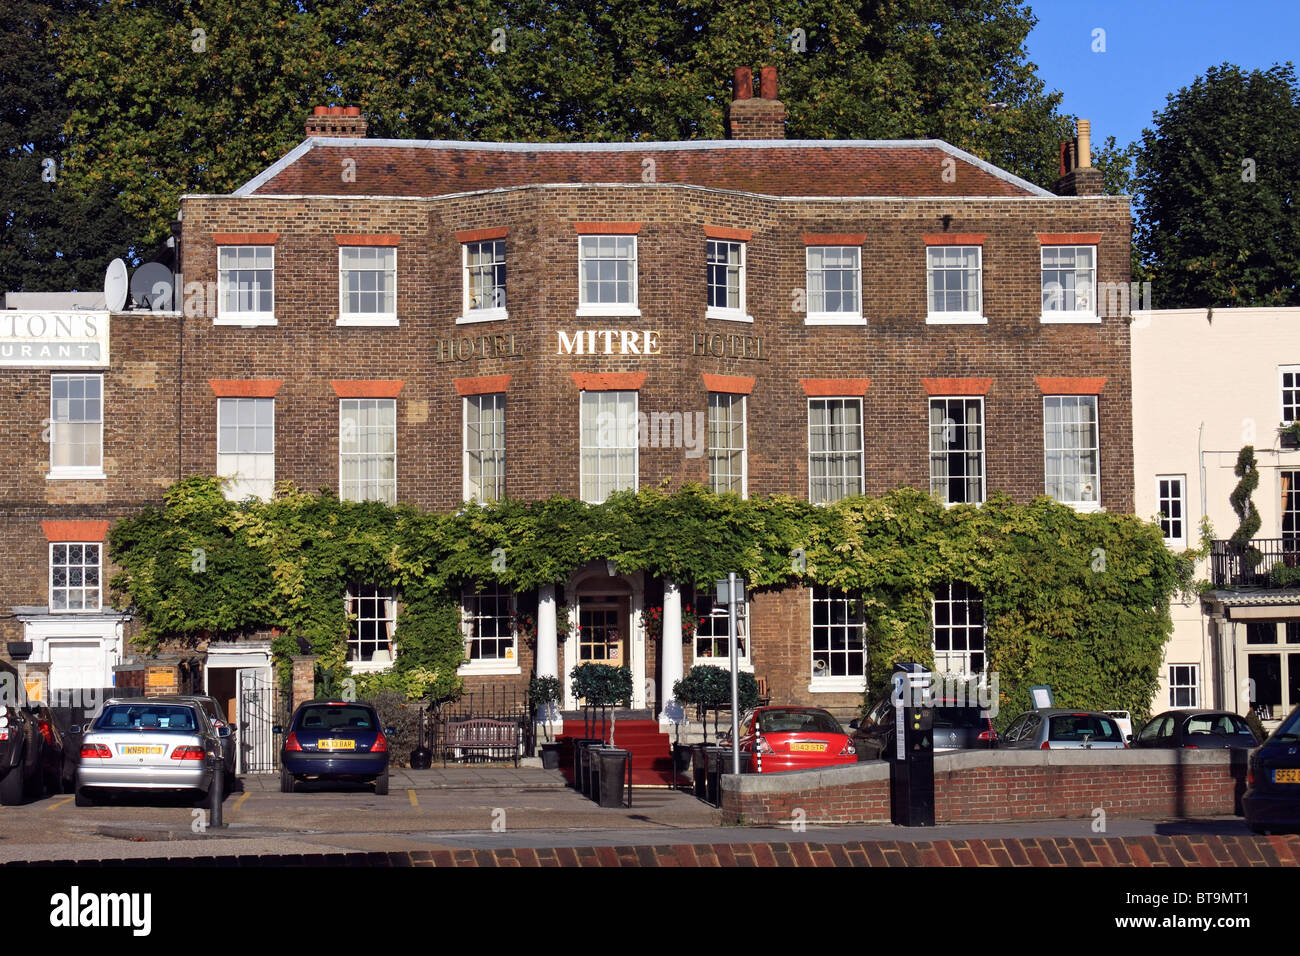 The Mitre Hotel at Hampton Court Bridge over the River Thames at Molesey. England UK. Stock Photo